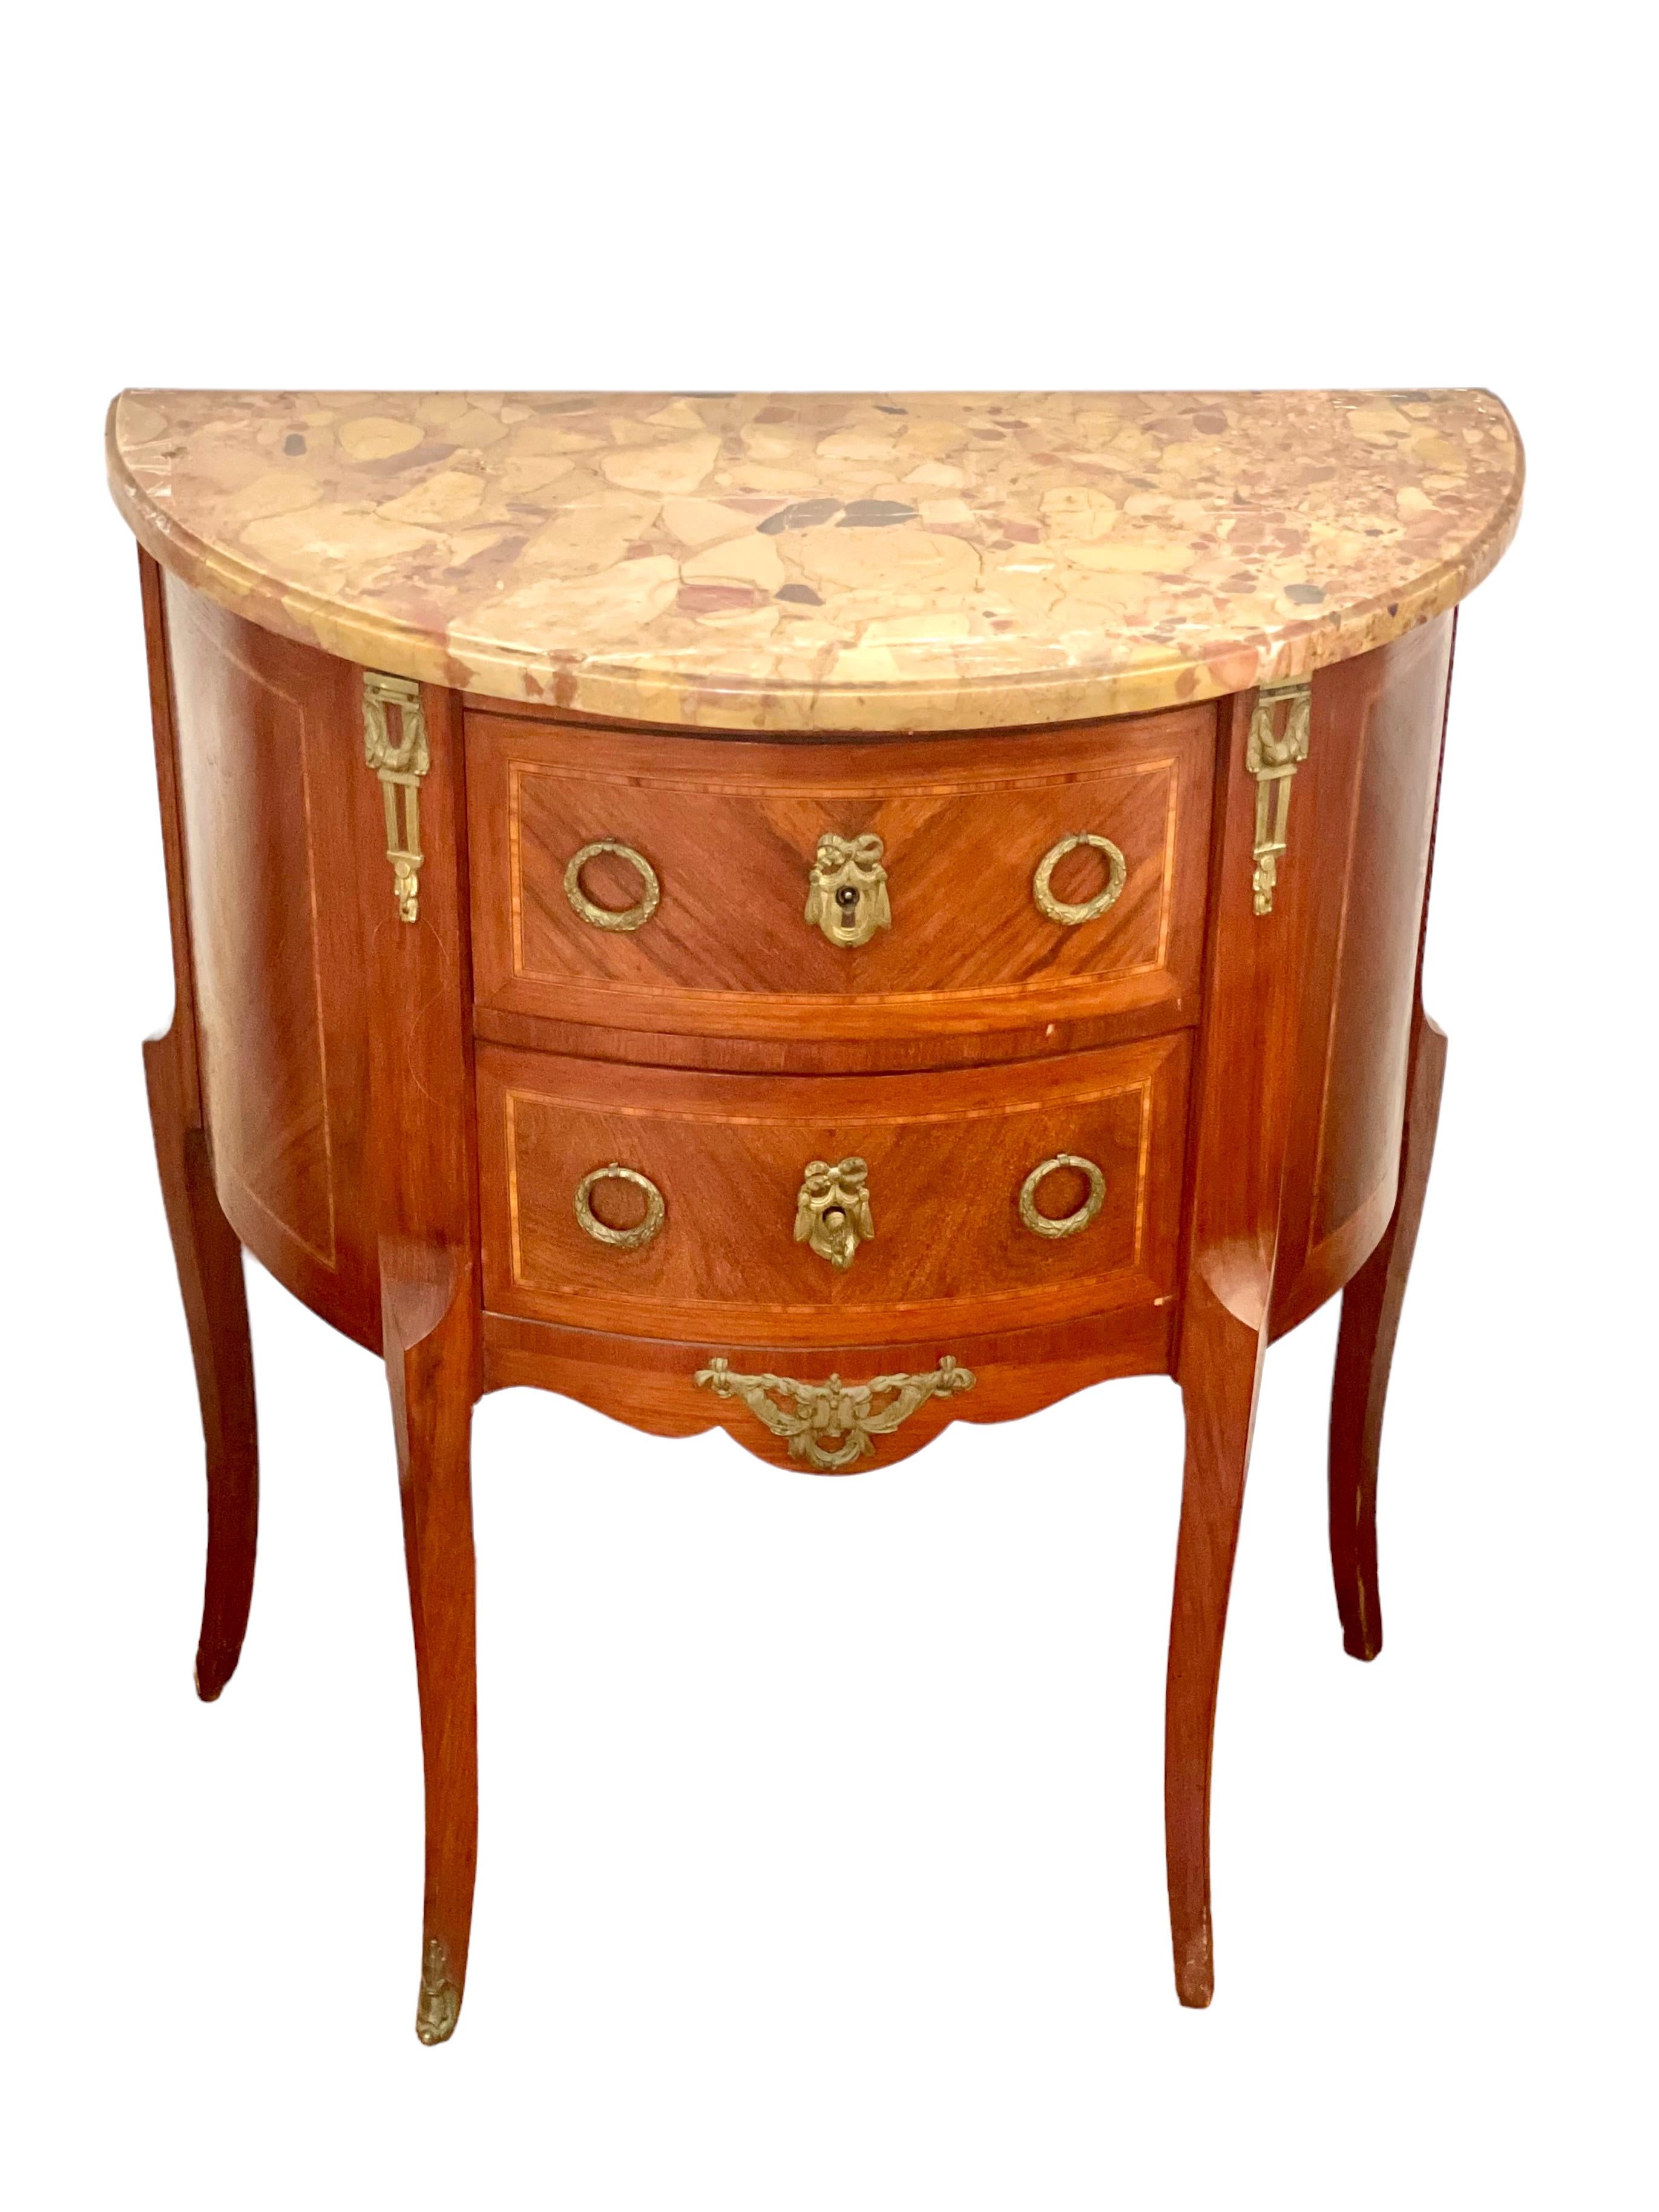 A charming, French Louis XVI transitional style demi-lune two-drawer commode, with an intricate inlay of cross-banded patterns across the facade and sides. Fitted with fine, gilt bronze mounts, drawer pulls and feet, and topped with marble, this